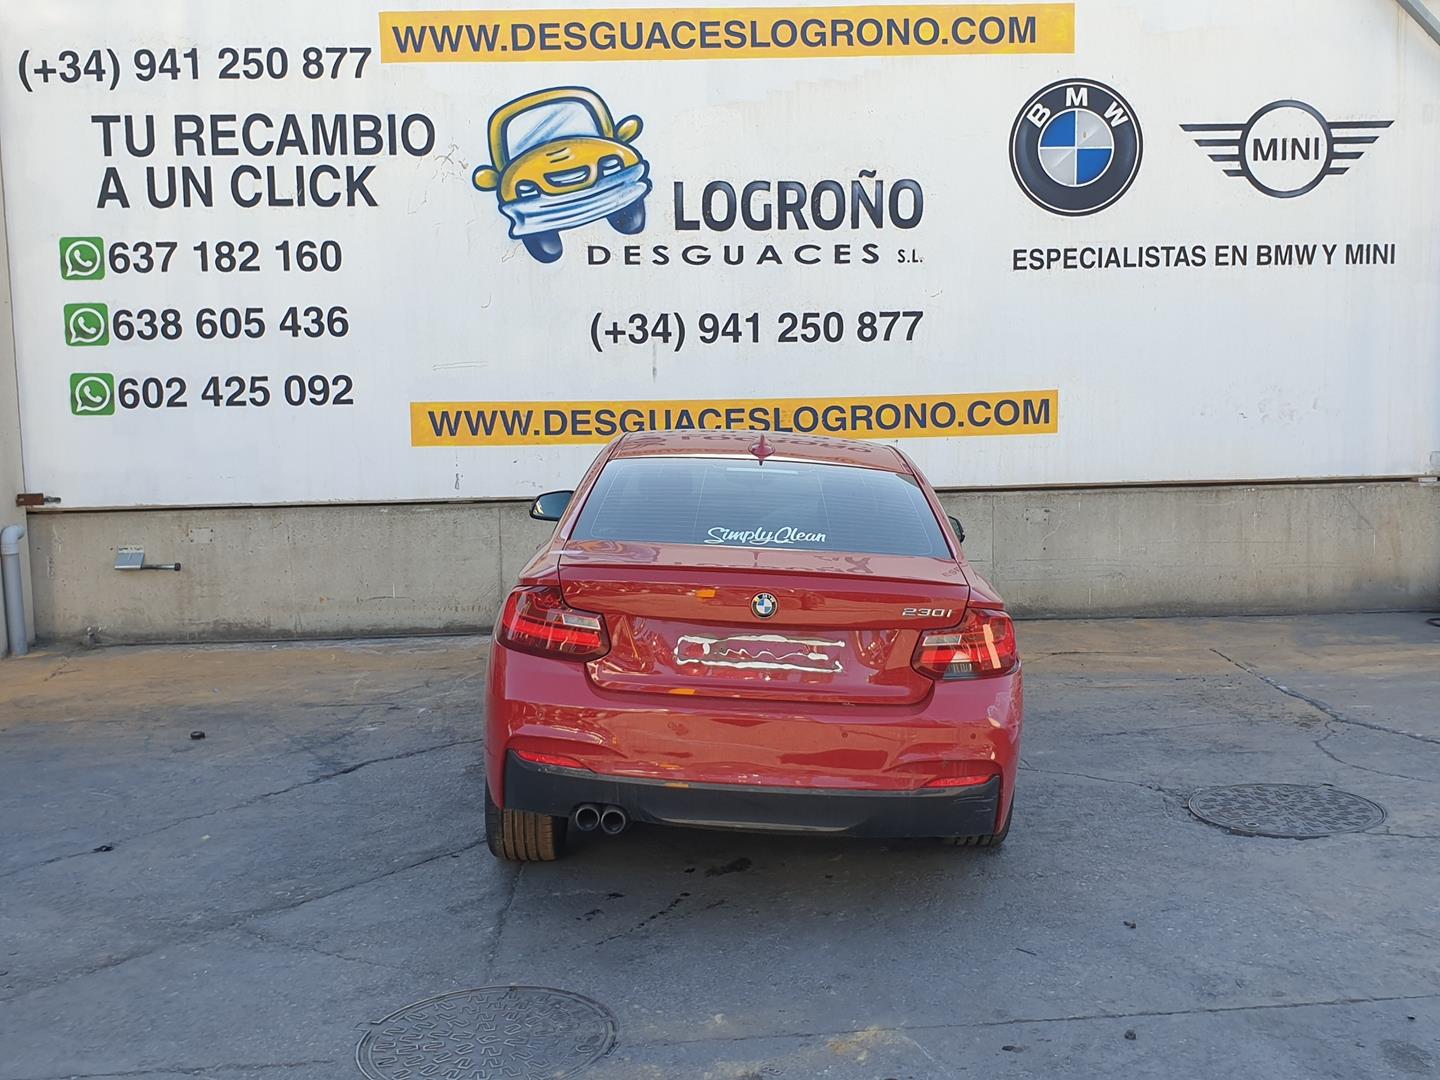 BMW 2 Series F22/F23 (2013-2020) Other Body Parts 51778051947, 51778056817, COLORROJOA75 19850131